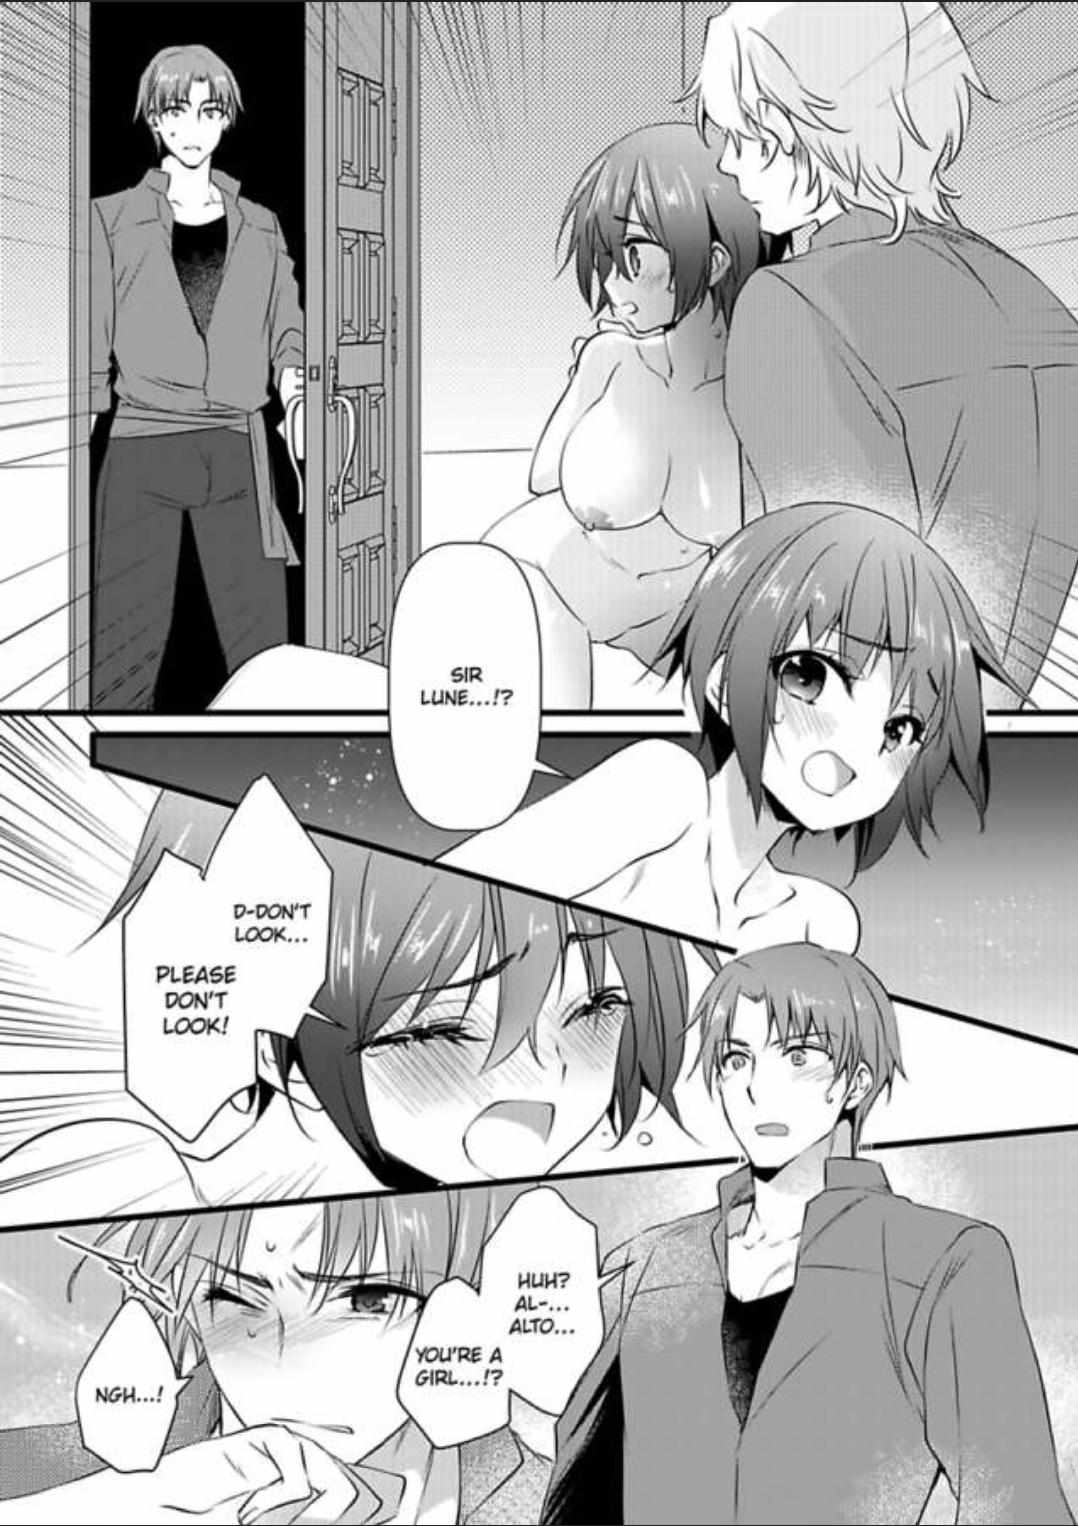 I Turned into a Girl and Turned on All the Knights! -I Need to Have Sex to Turn Back!- - chapter 6 - #1